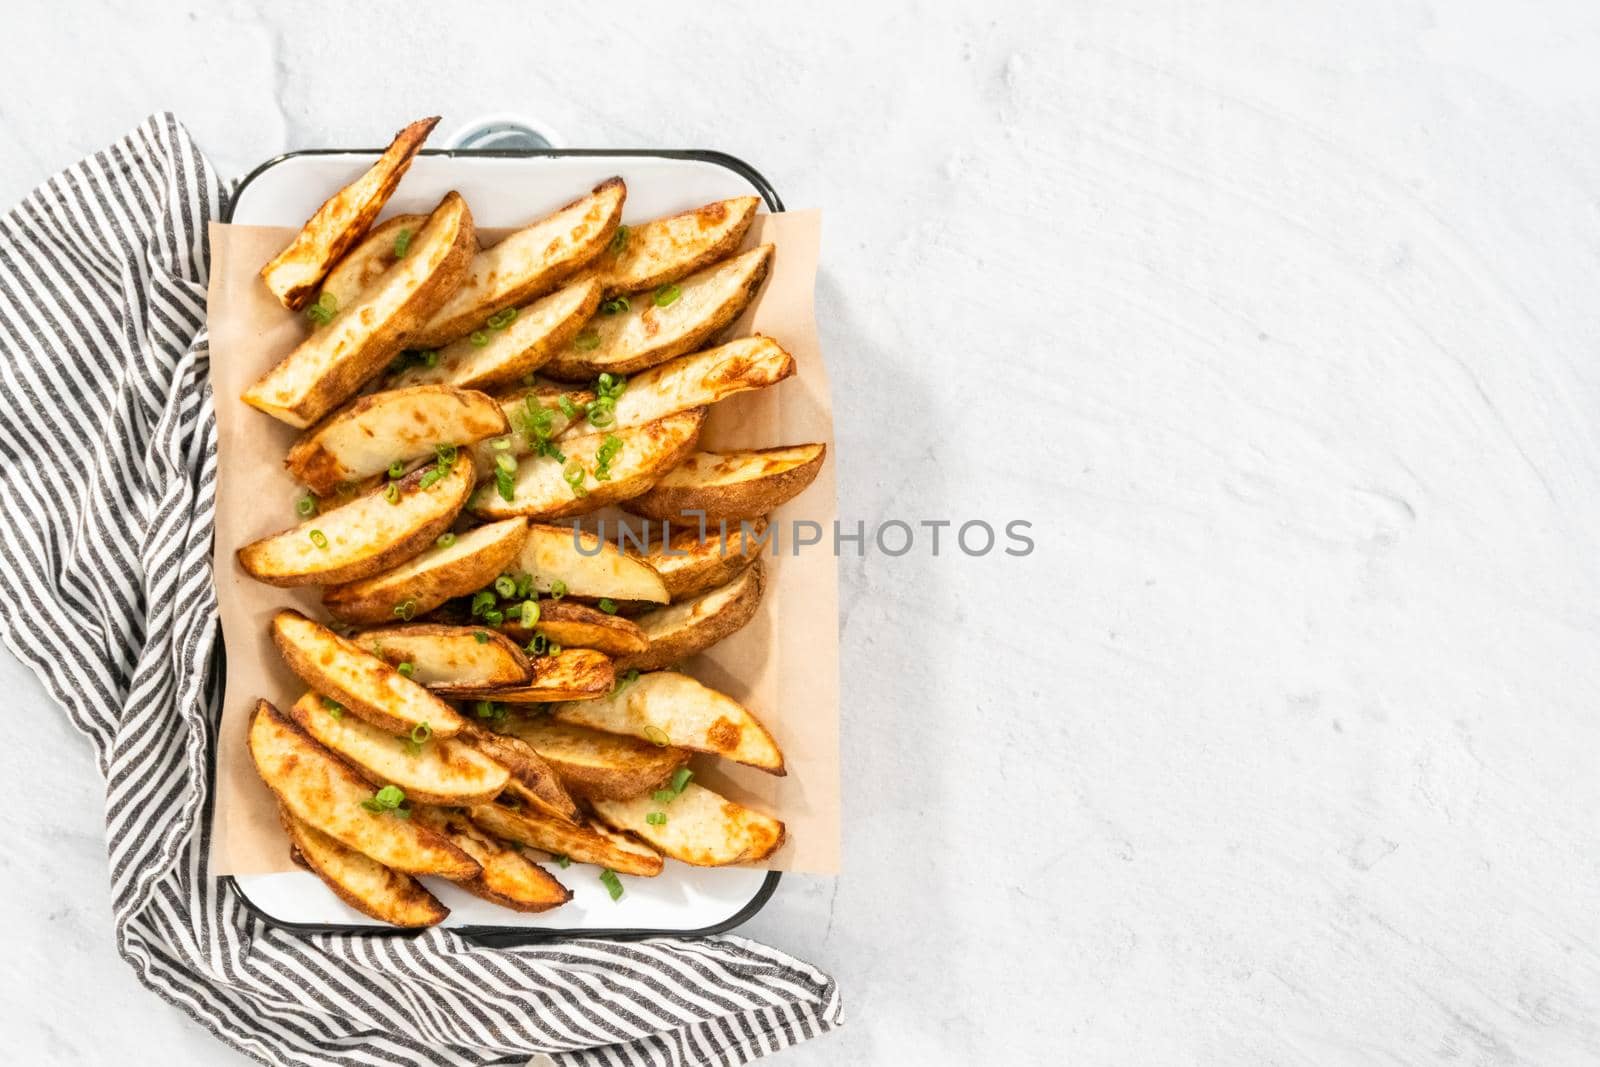 Flat lay. Freshly baked potato wedges with spices on a white serving tray.